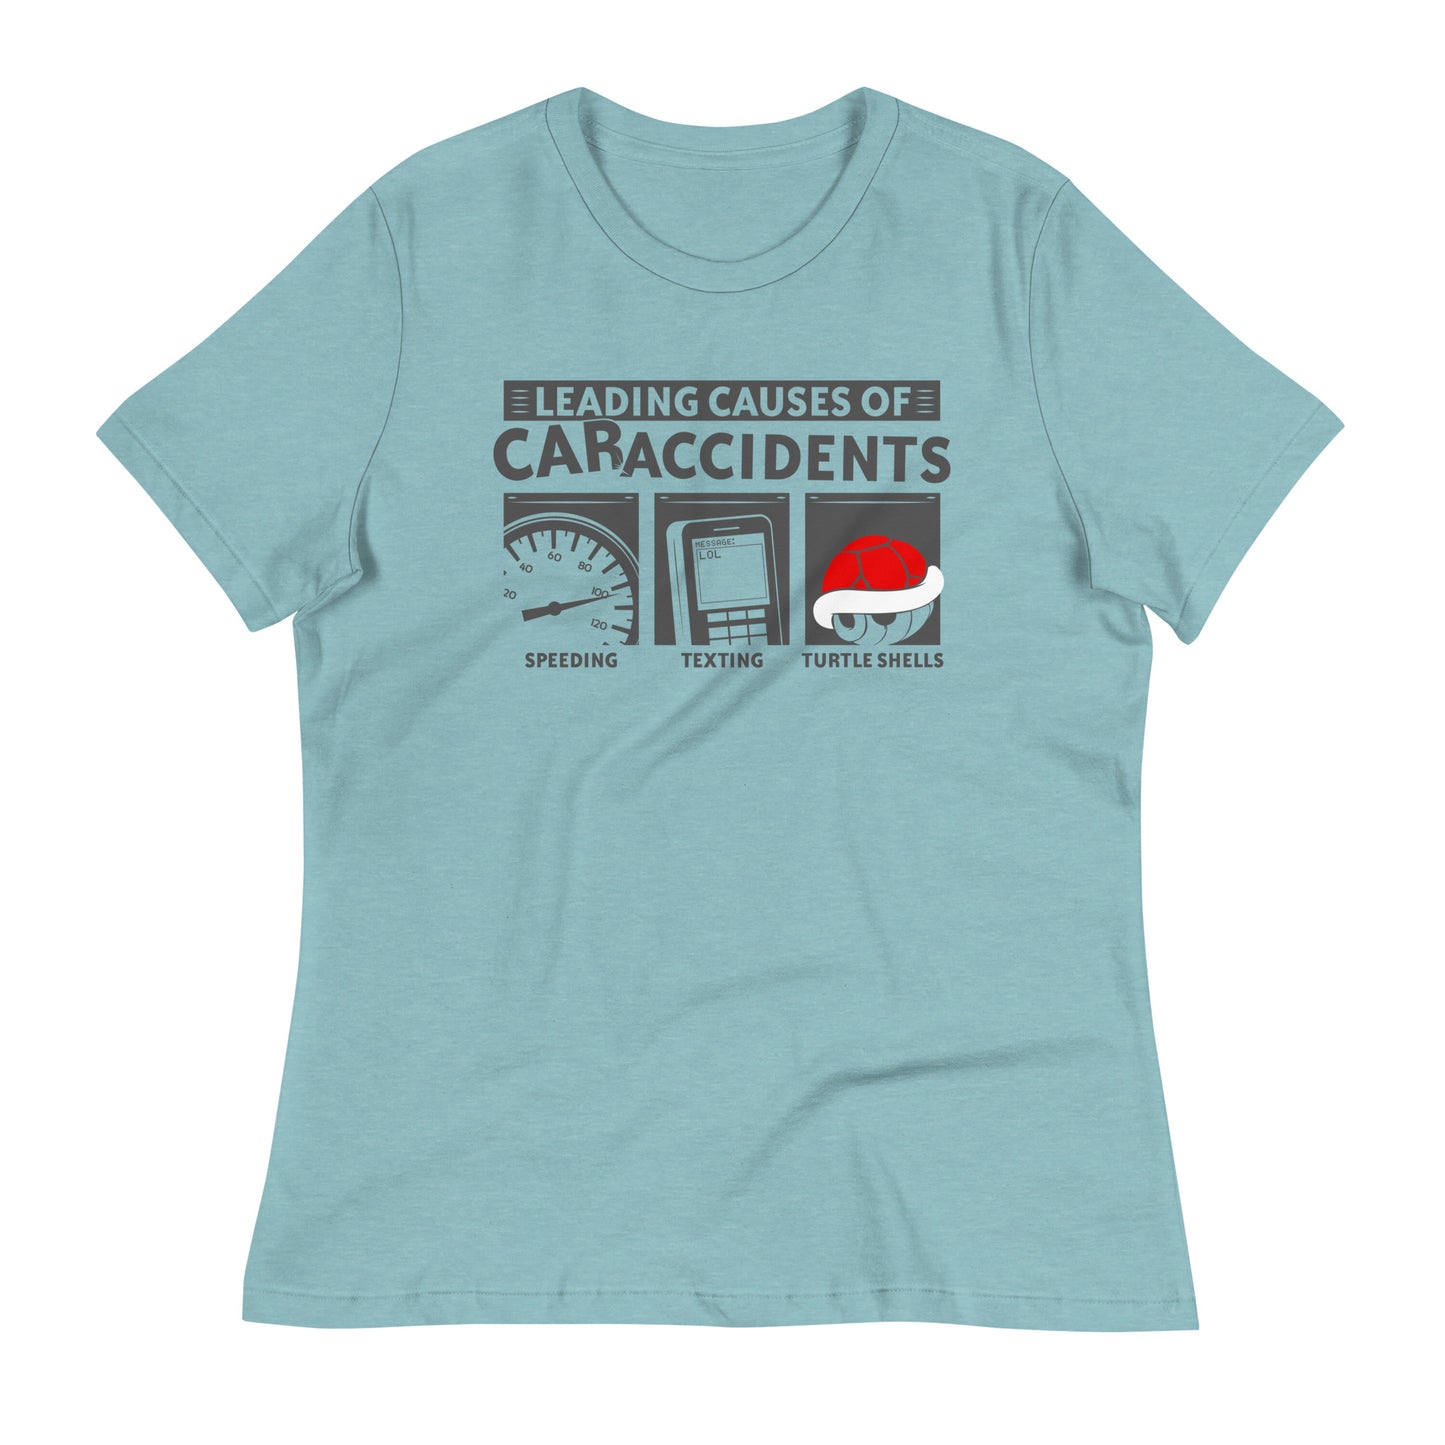 Leading Causes of Accidents Women's Signature Tee